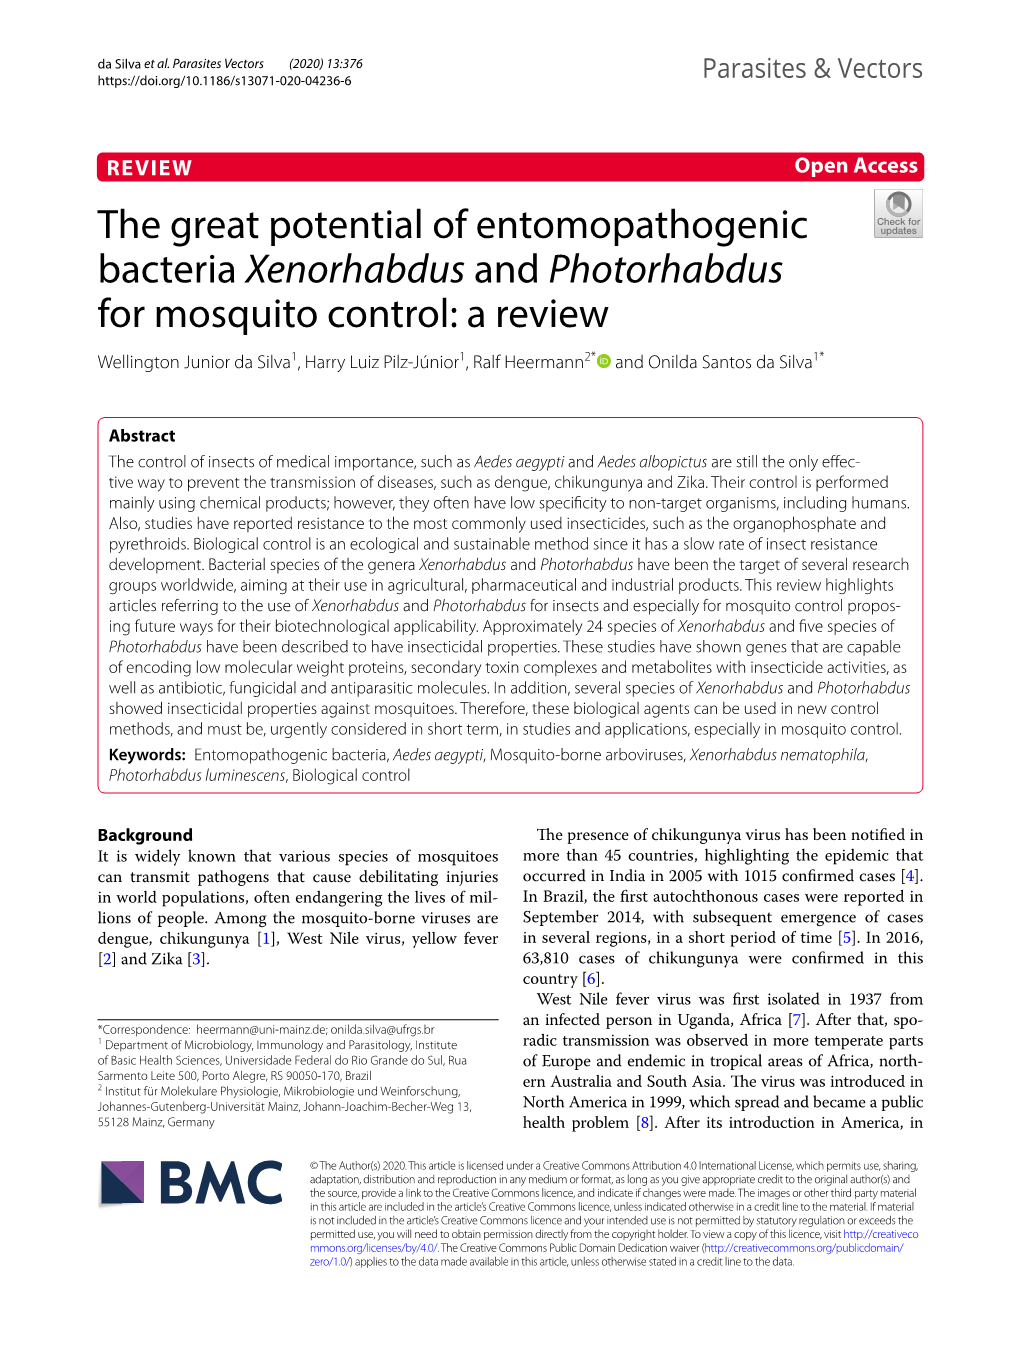 The Great Potential of Entomopathogenic Bacteria